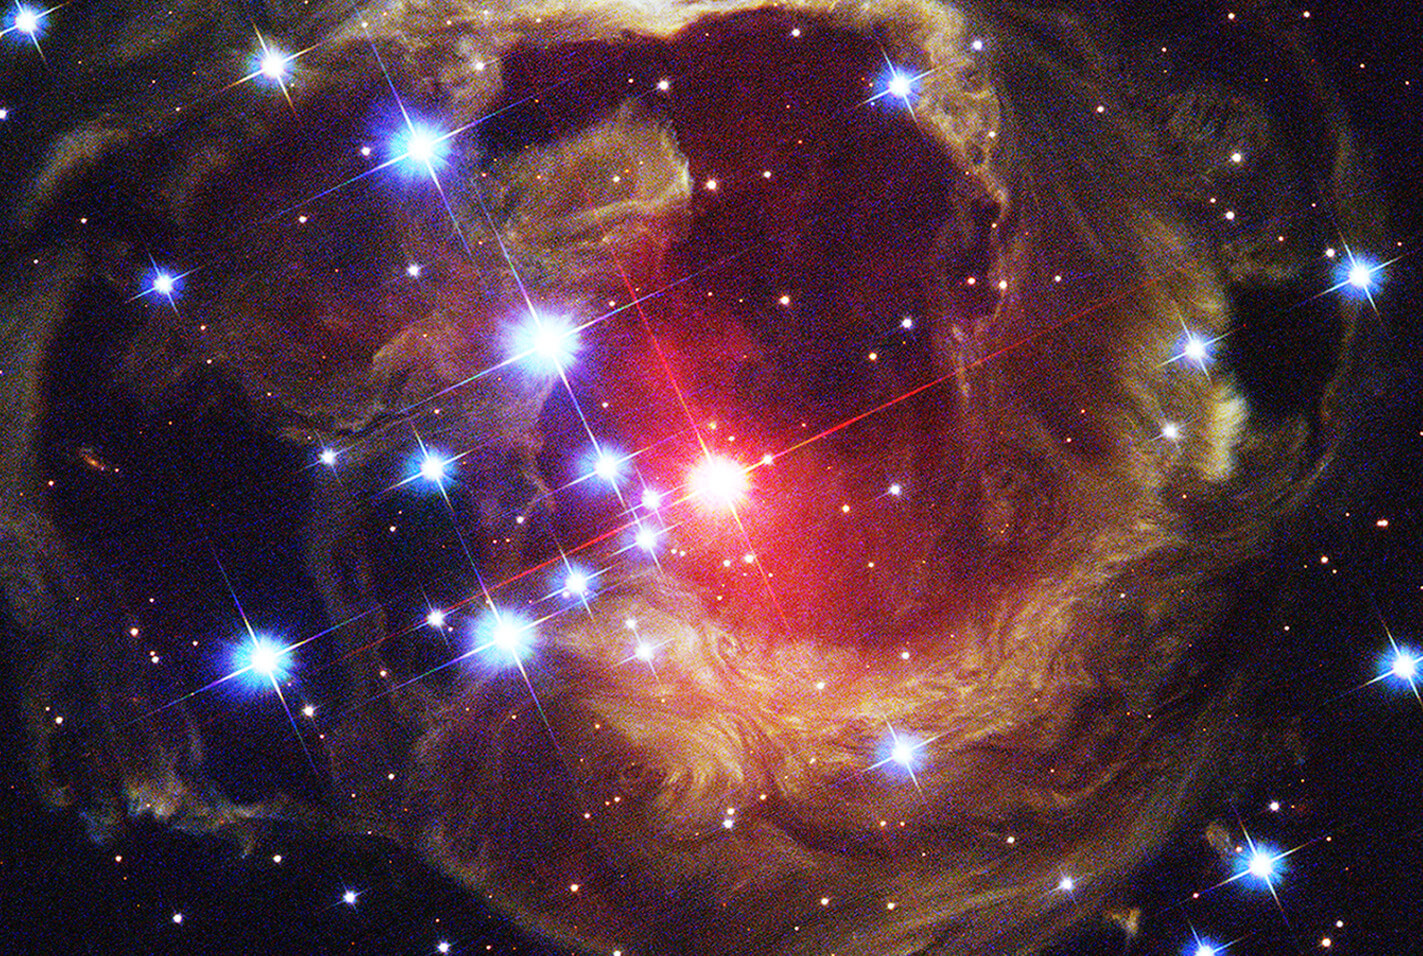 Central star and diffuse surrounding stars against dust